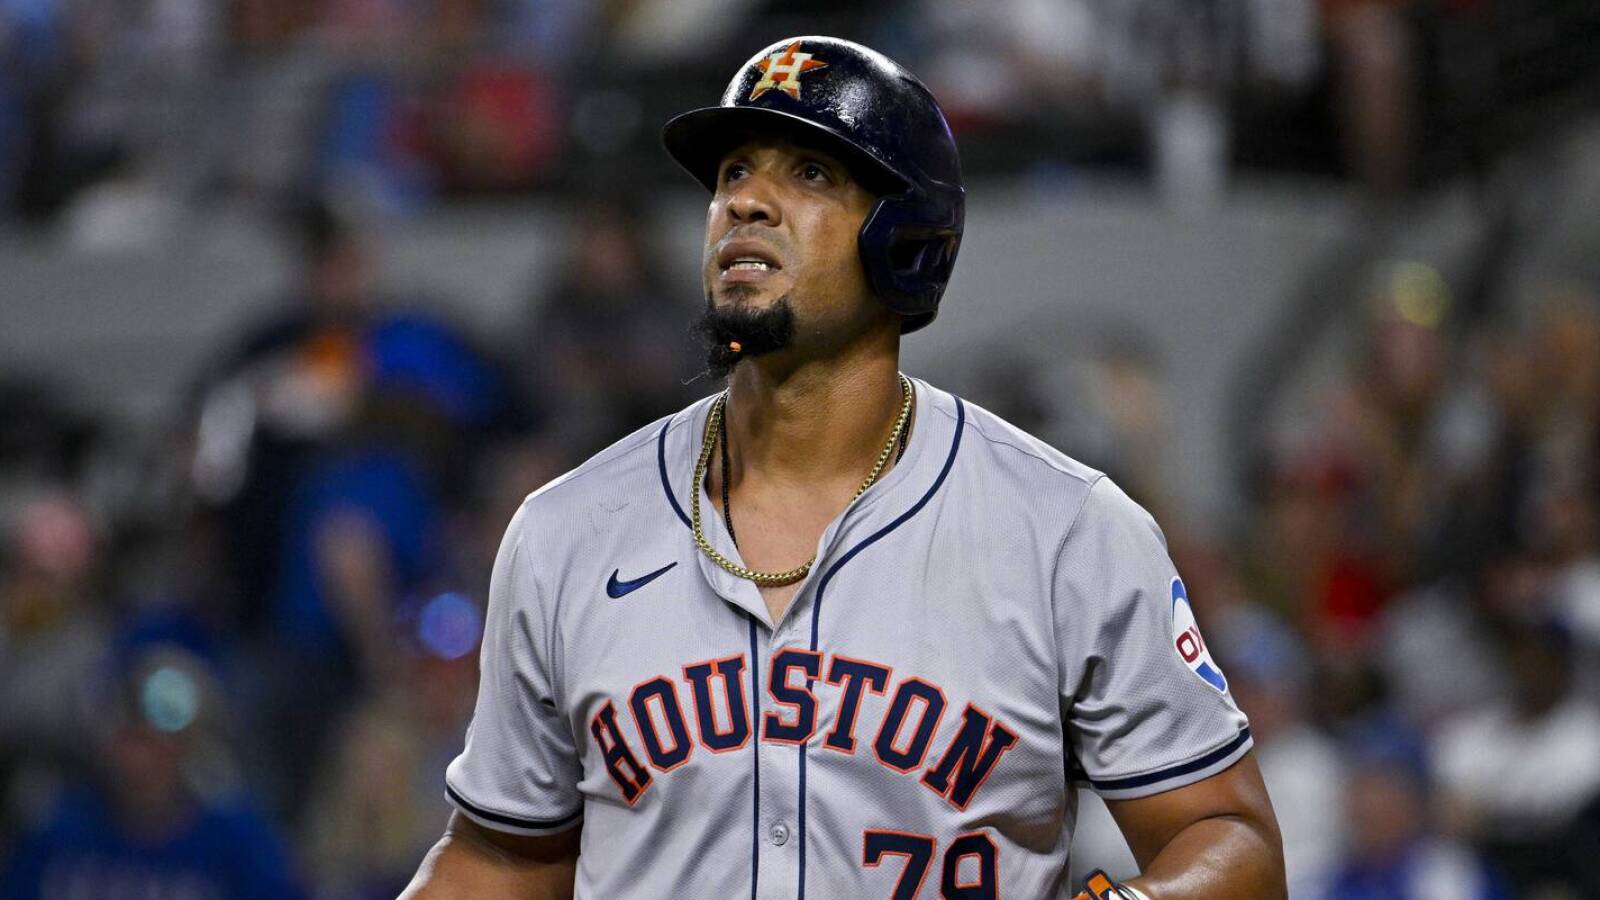 Three-time All-Star running out of time with Astros